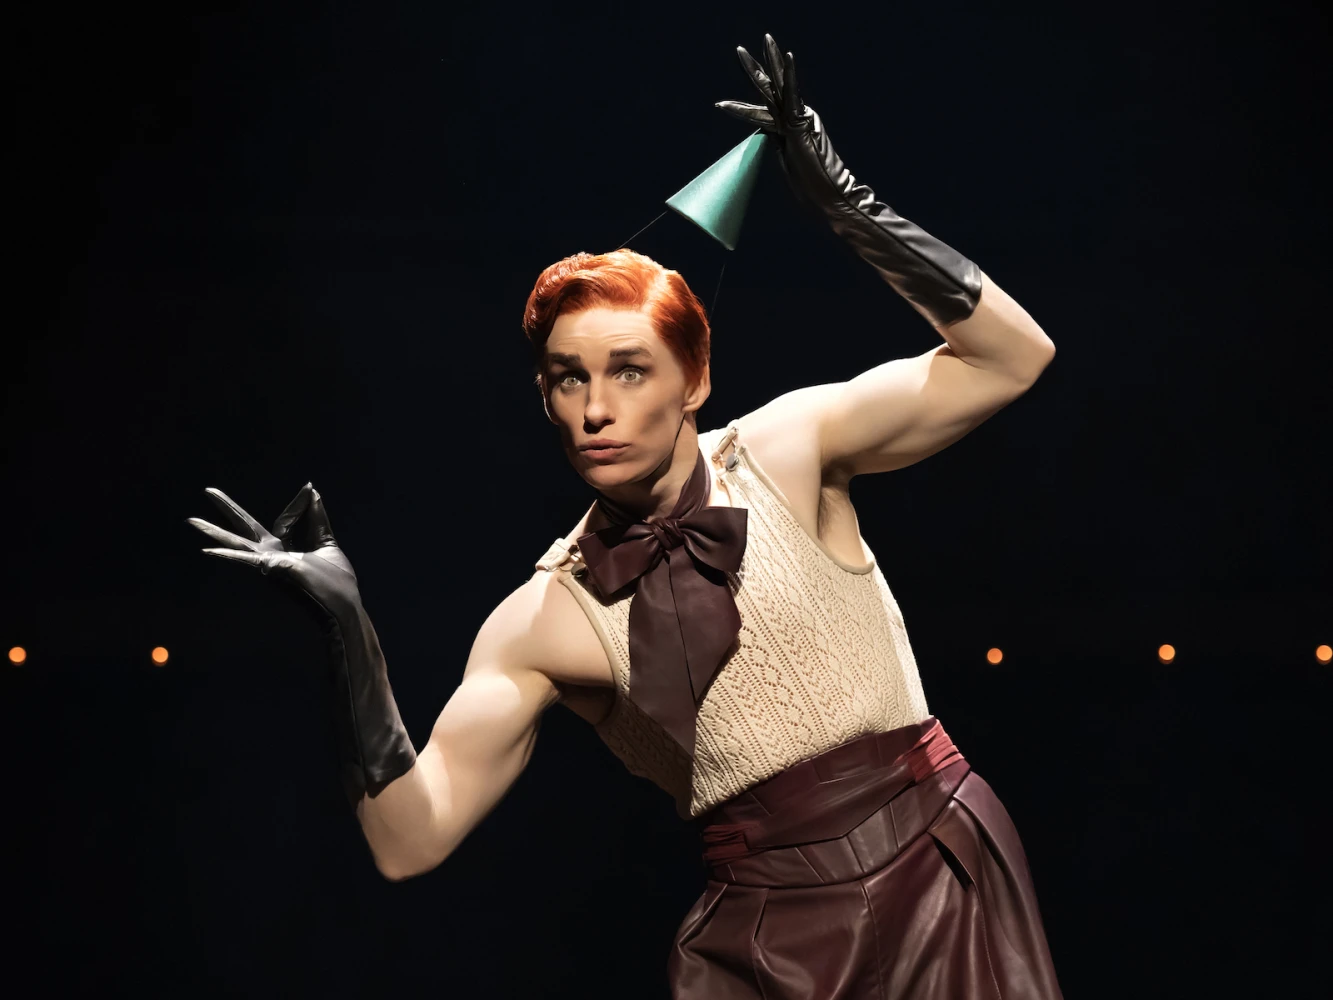 CABARET at the Kit Kat Club on Broadway: What to expect - 6